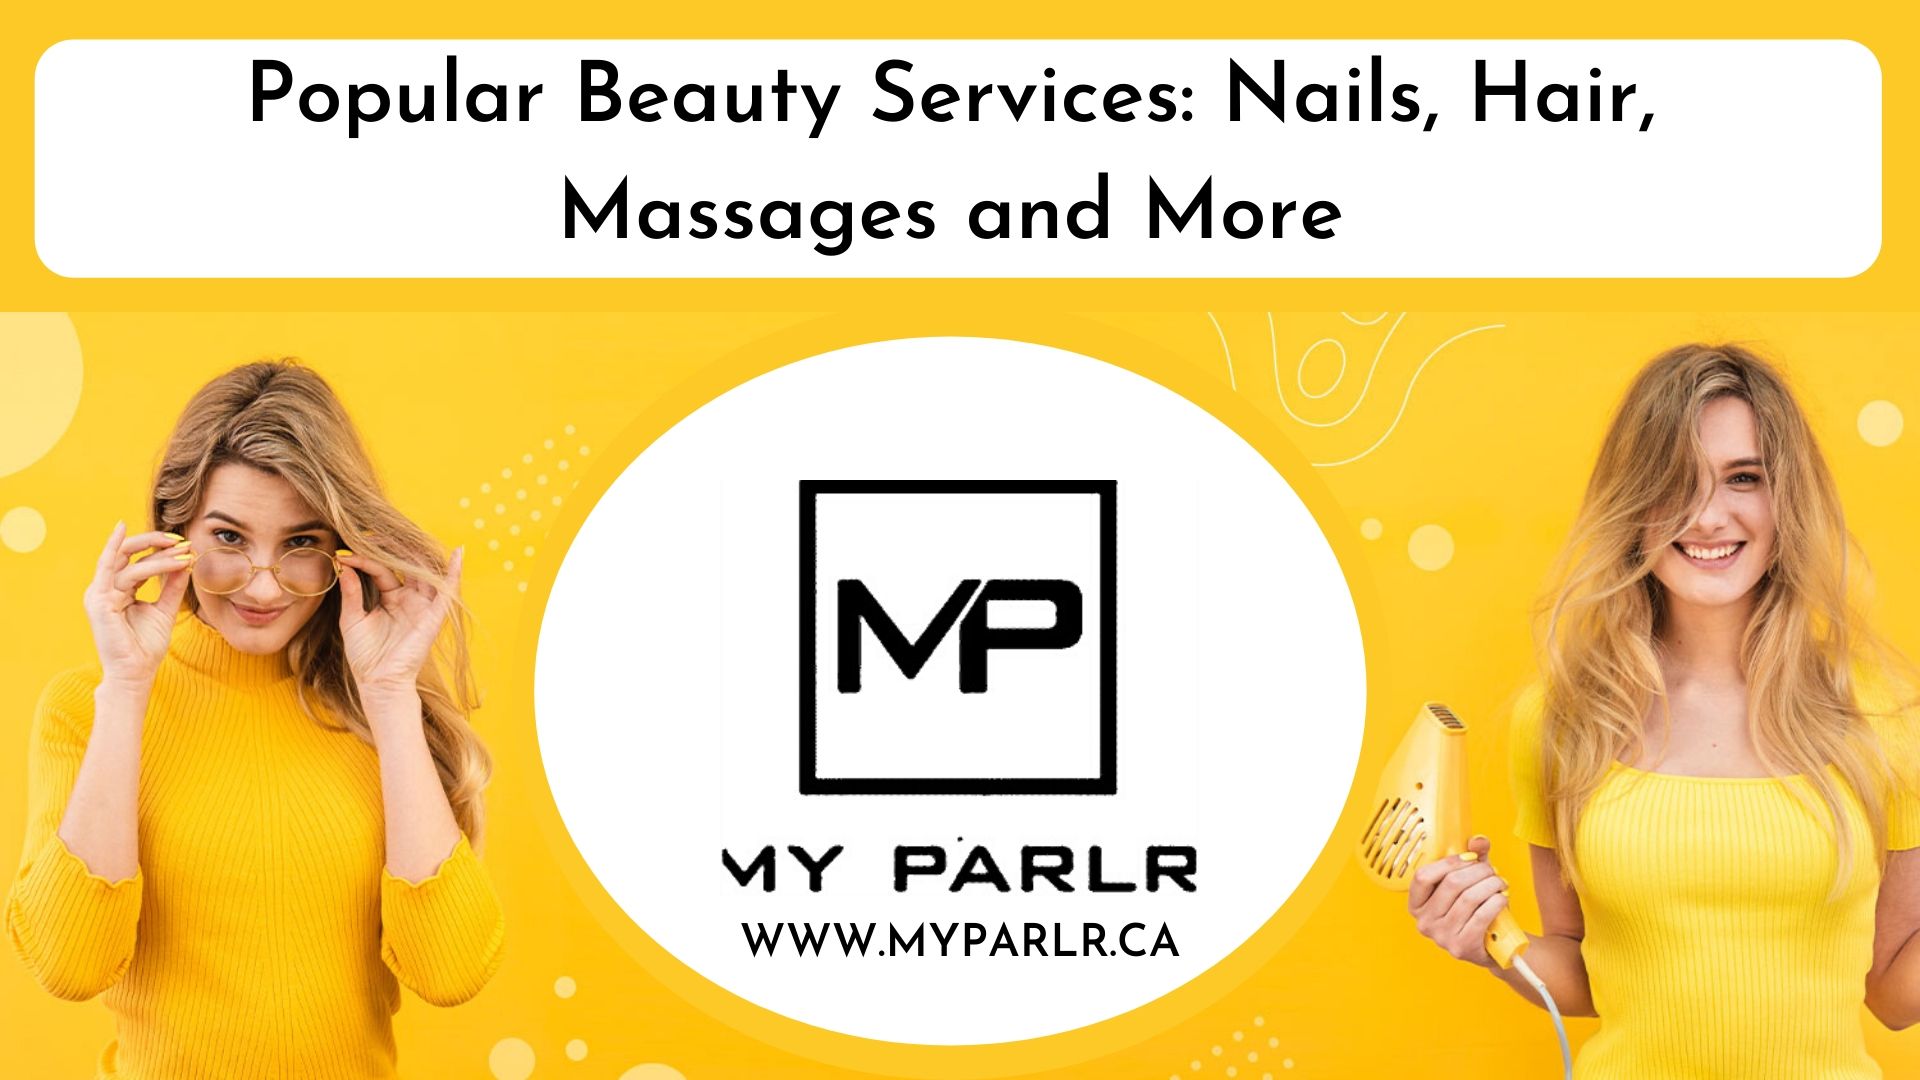 Popular_Beauty_Services__Nails_Hair_Massages_and_More_1.jpg